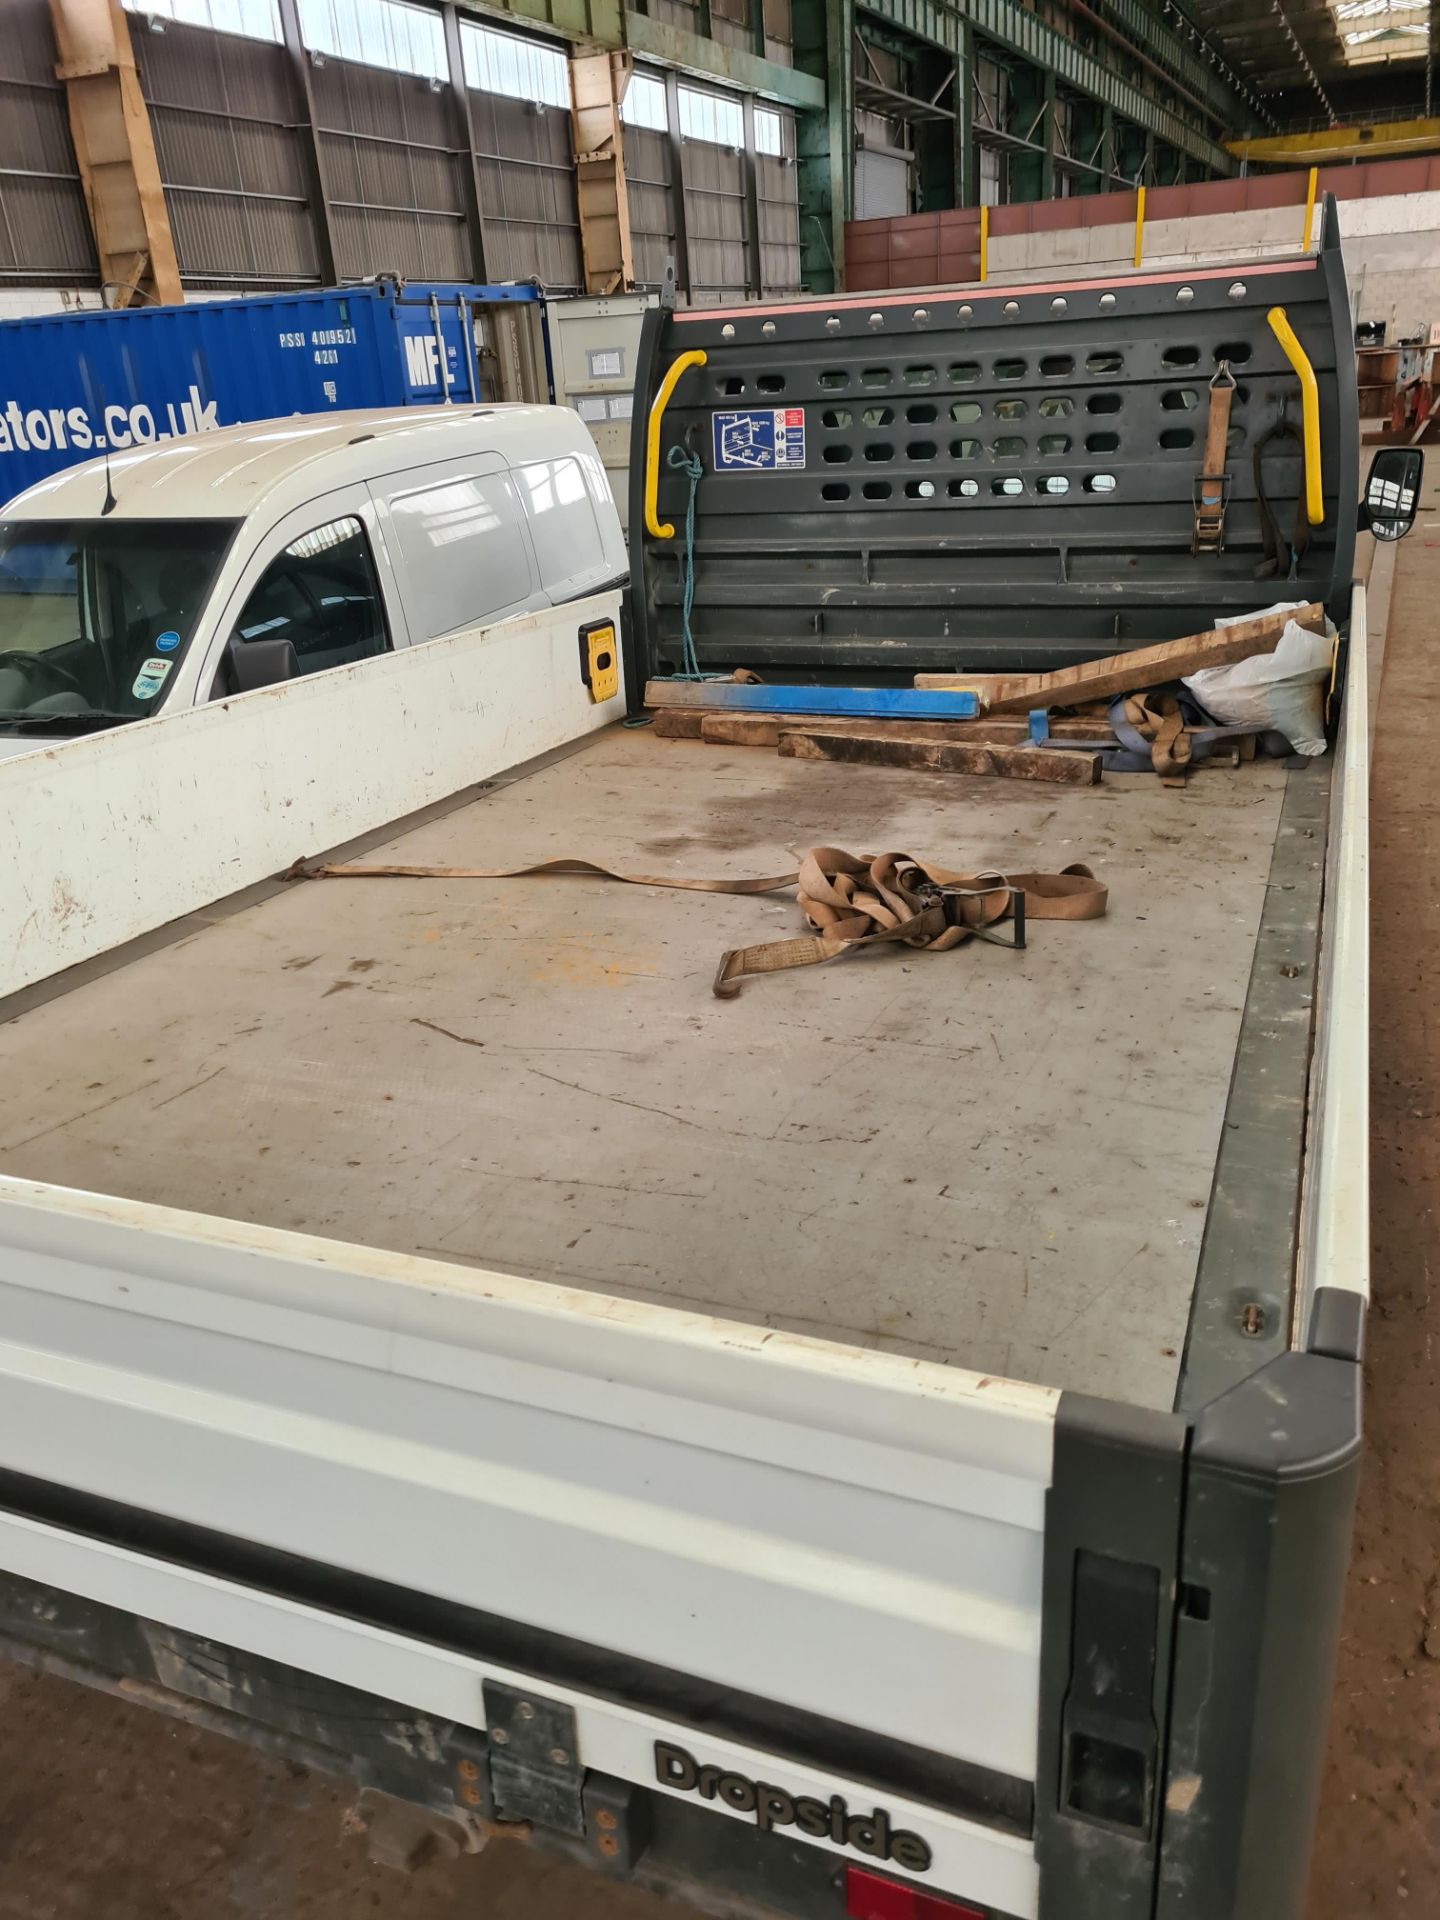 Ford Transit 350 Diesel Chassis Cab Dropside Truck - Image 4 of 5